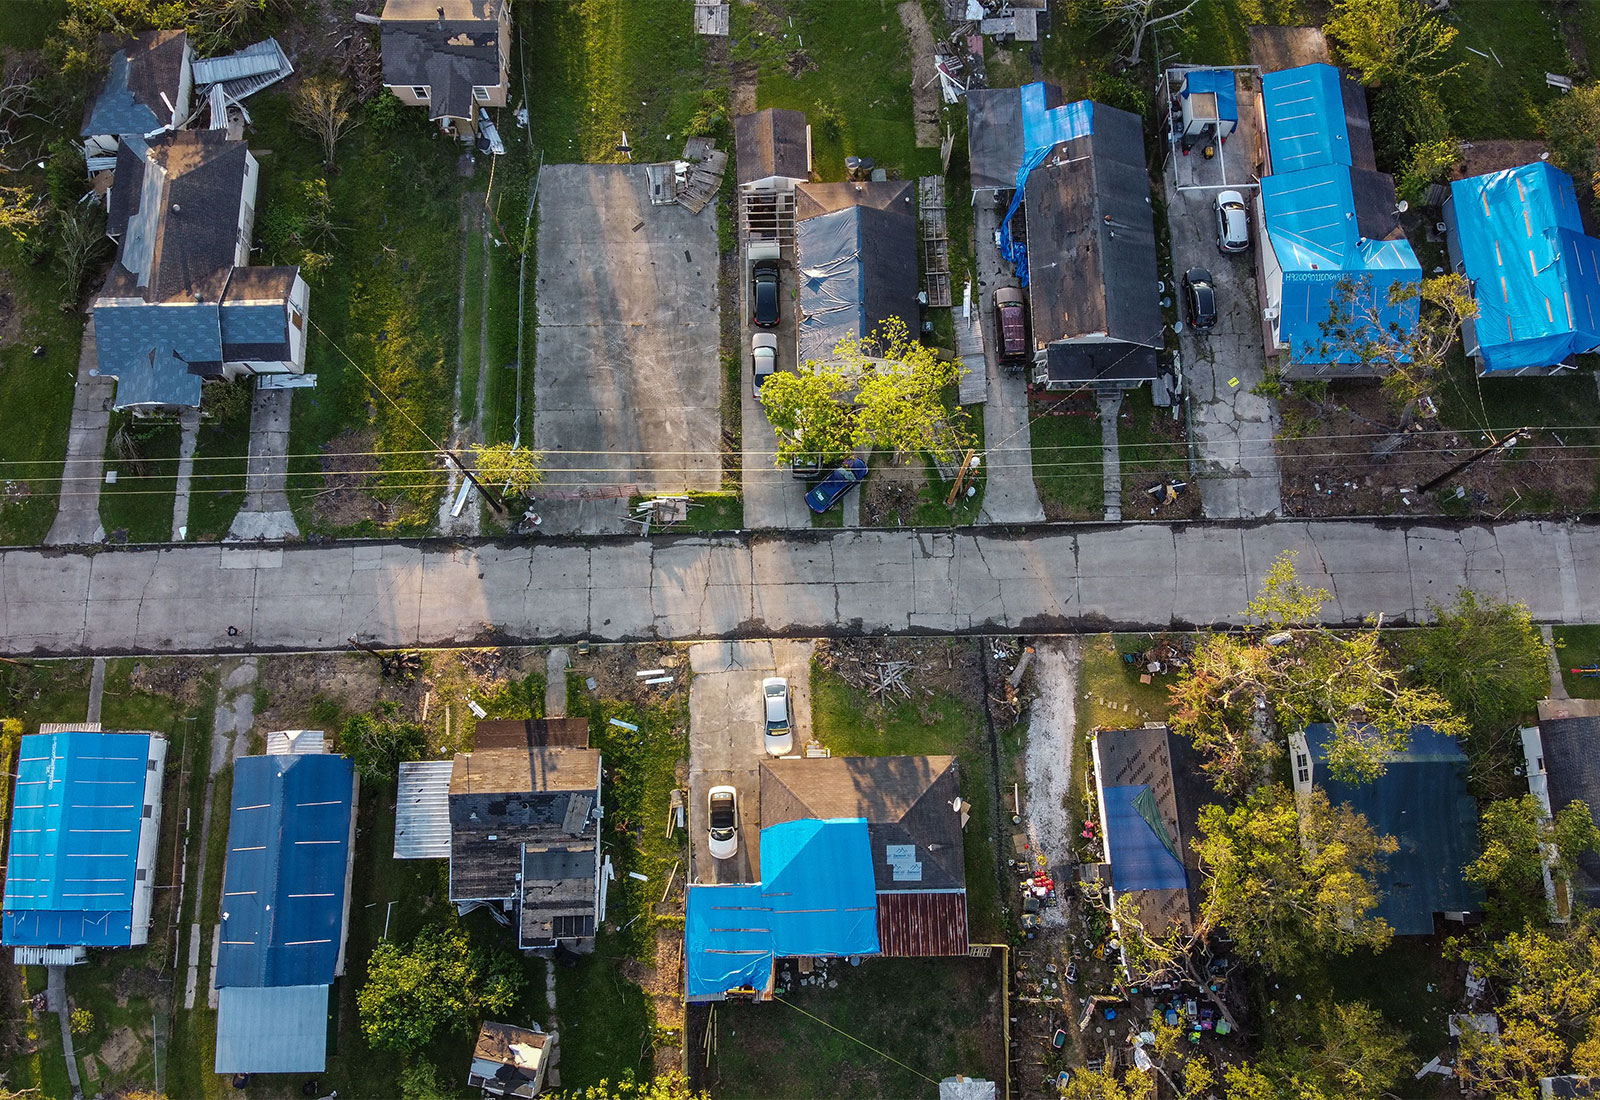 Aerial view of houses showing damage from a hurricane, most houses have blue tarps on the roofs